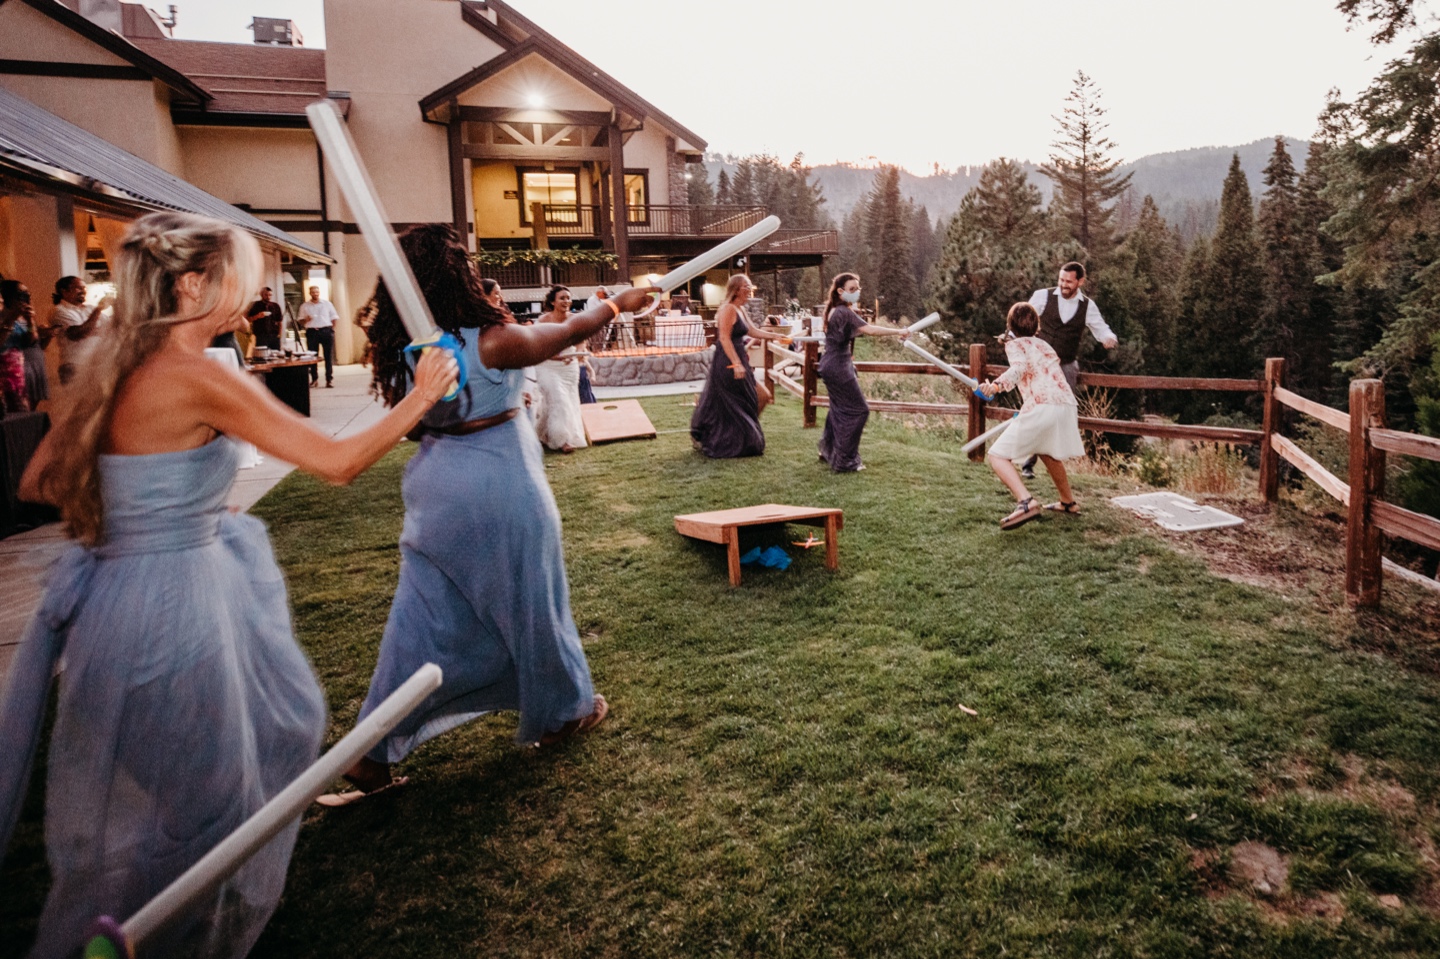 Bridesmaids provide backup for bride during sword fight with groom during Yosemite wedding reception at Tenaya Lodge